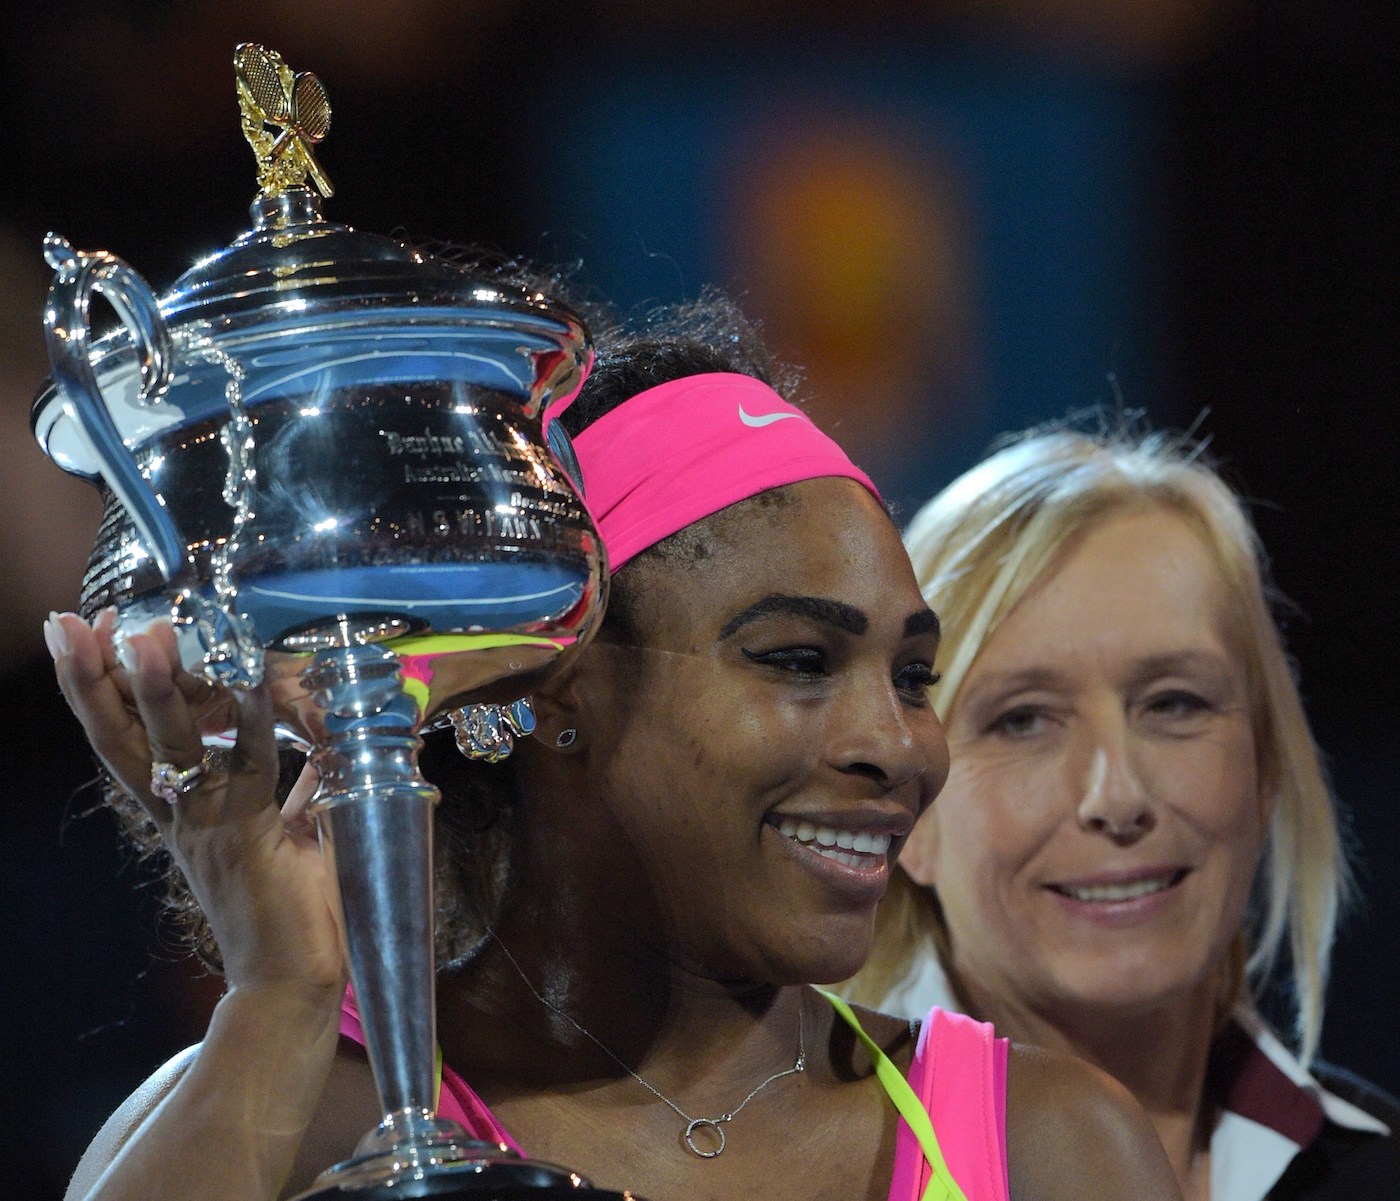 Serena Williams is one of the greatest women's tennis players ever, but Martina Navratilova contests Williams' status as the greatest of all time.